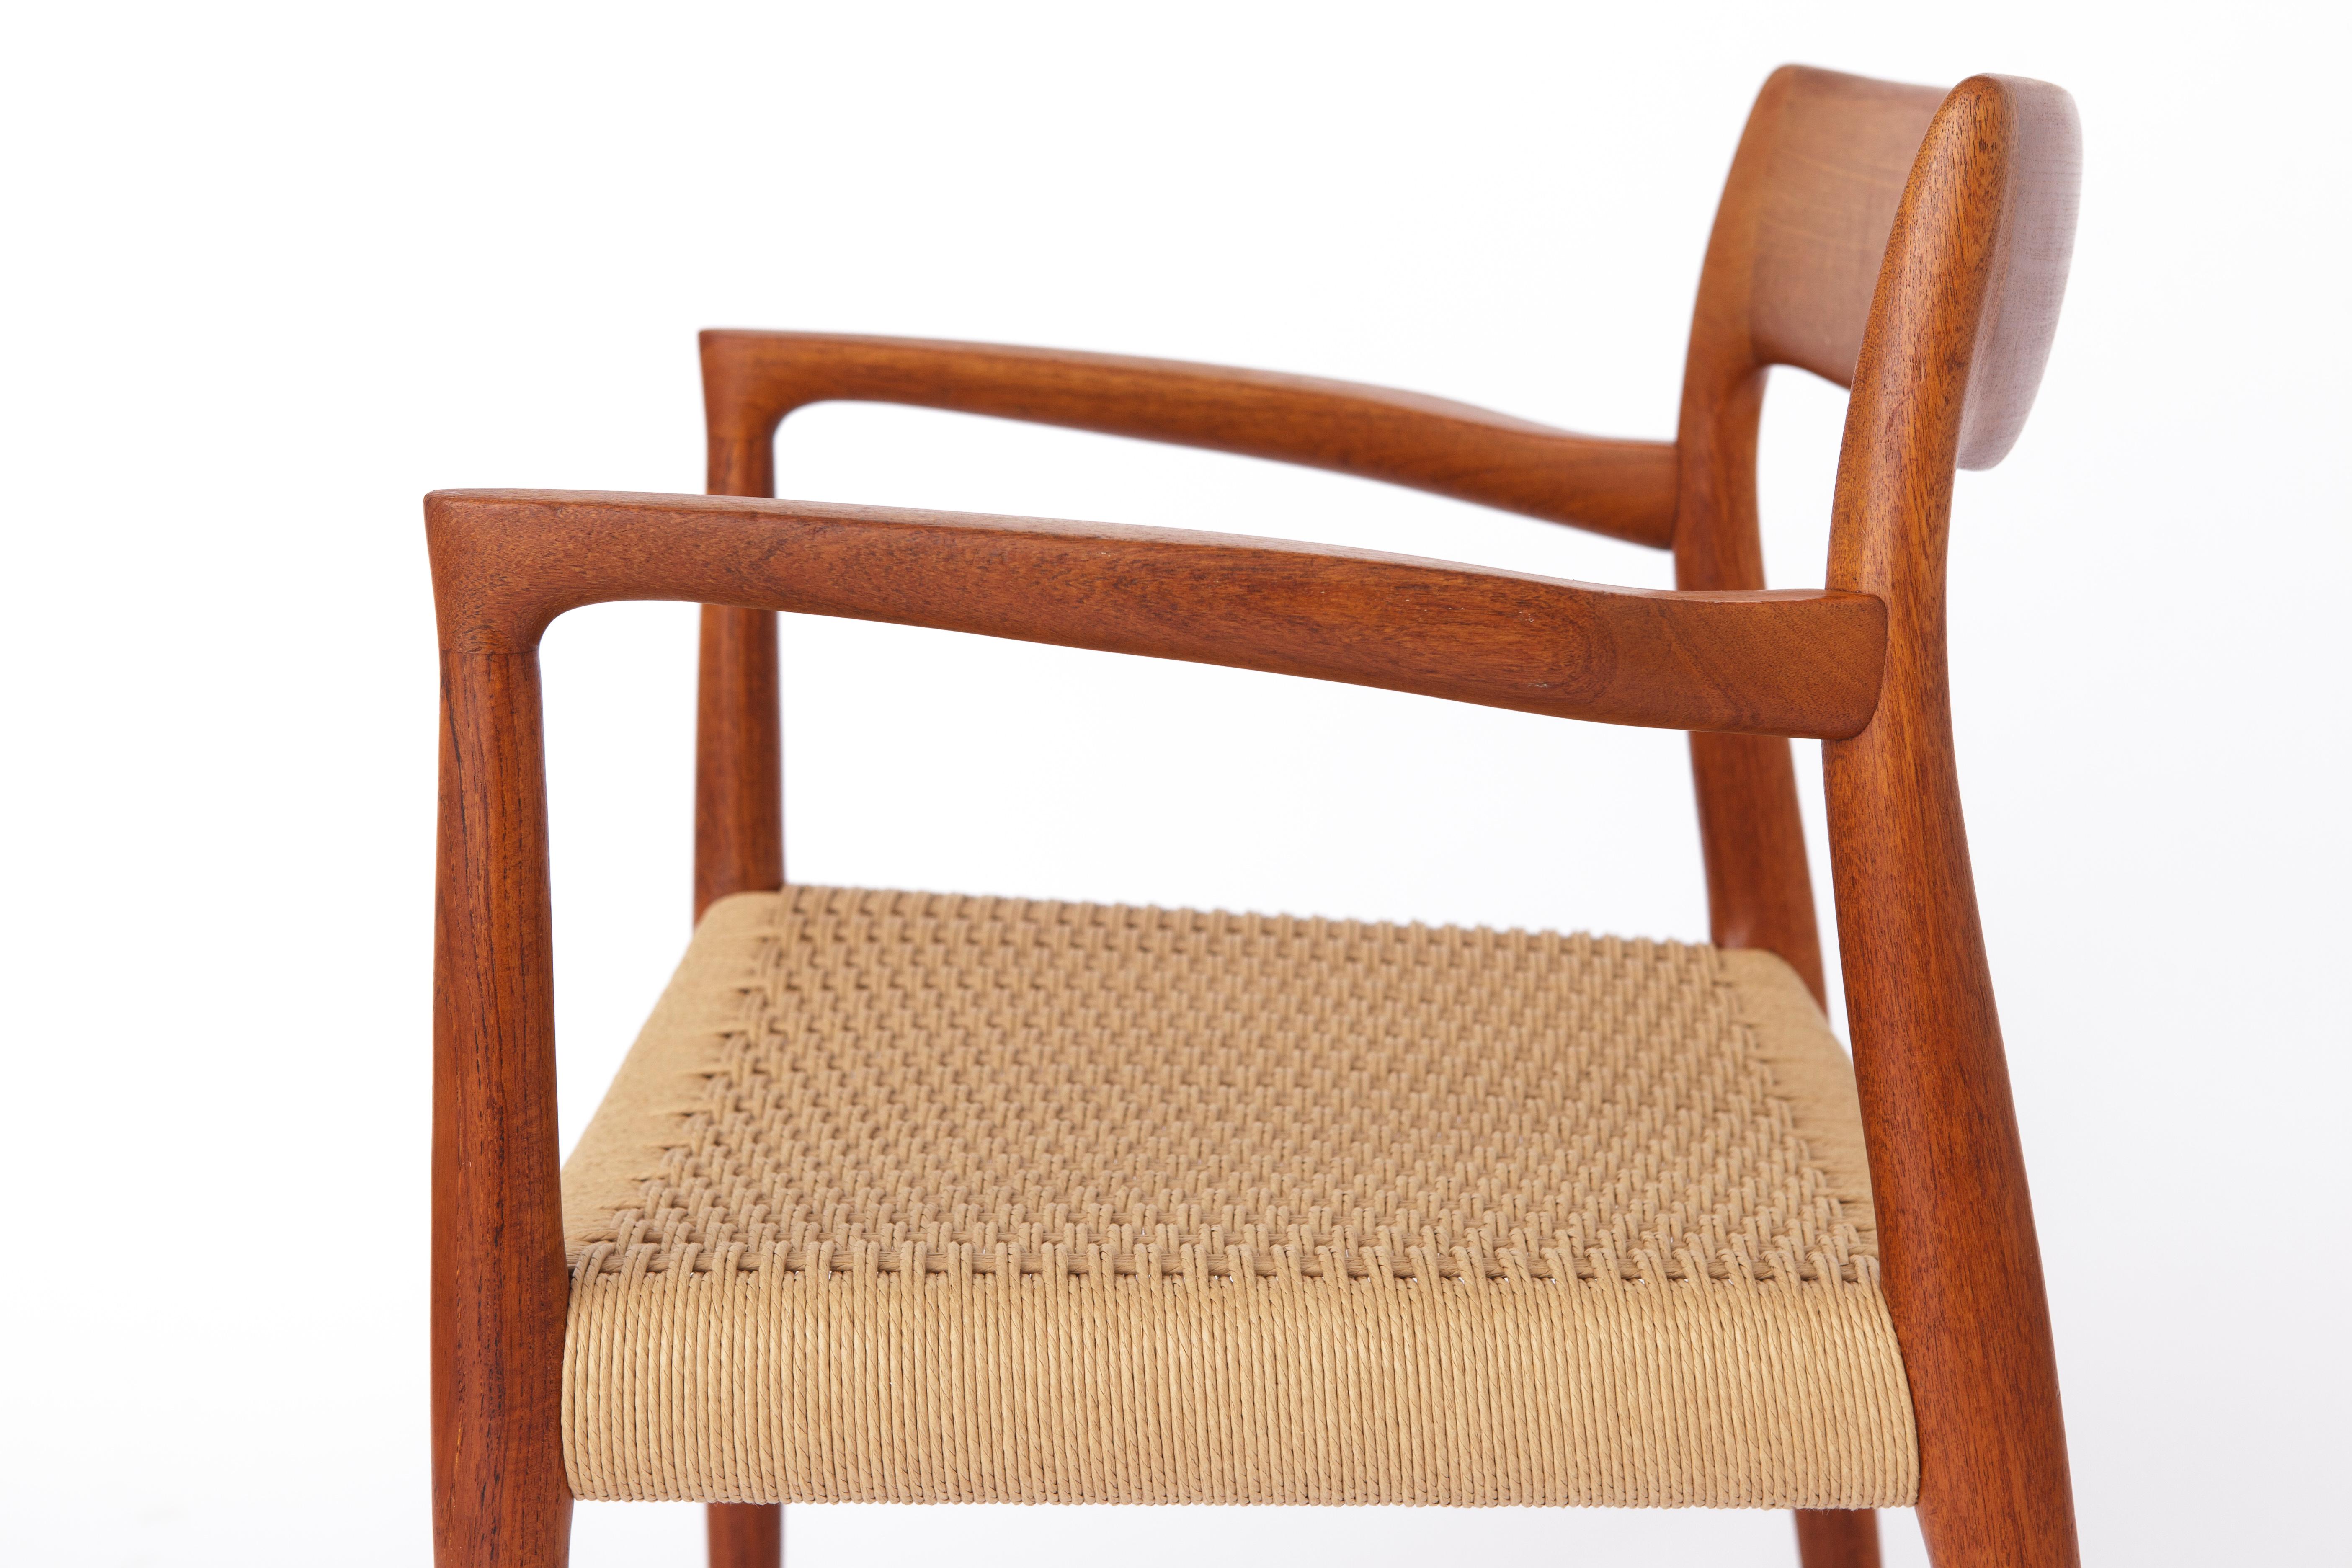 Polished Niels Moller armchair, model 57, 1950s Vintage, paper cord seat, dining chair For Sale